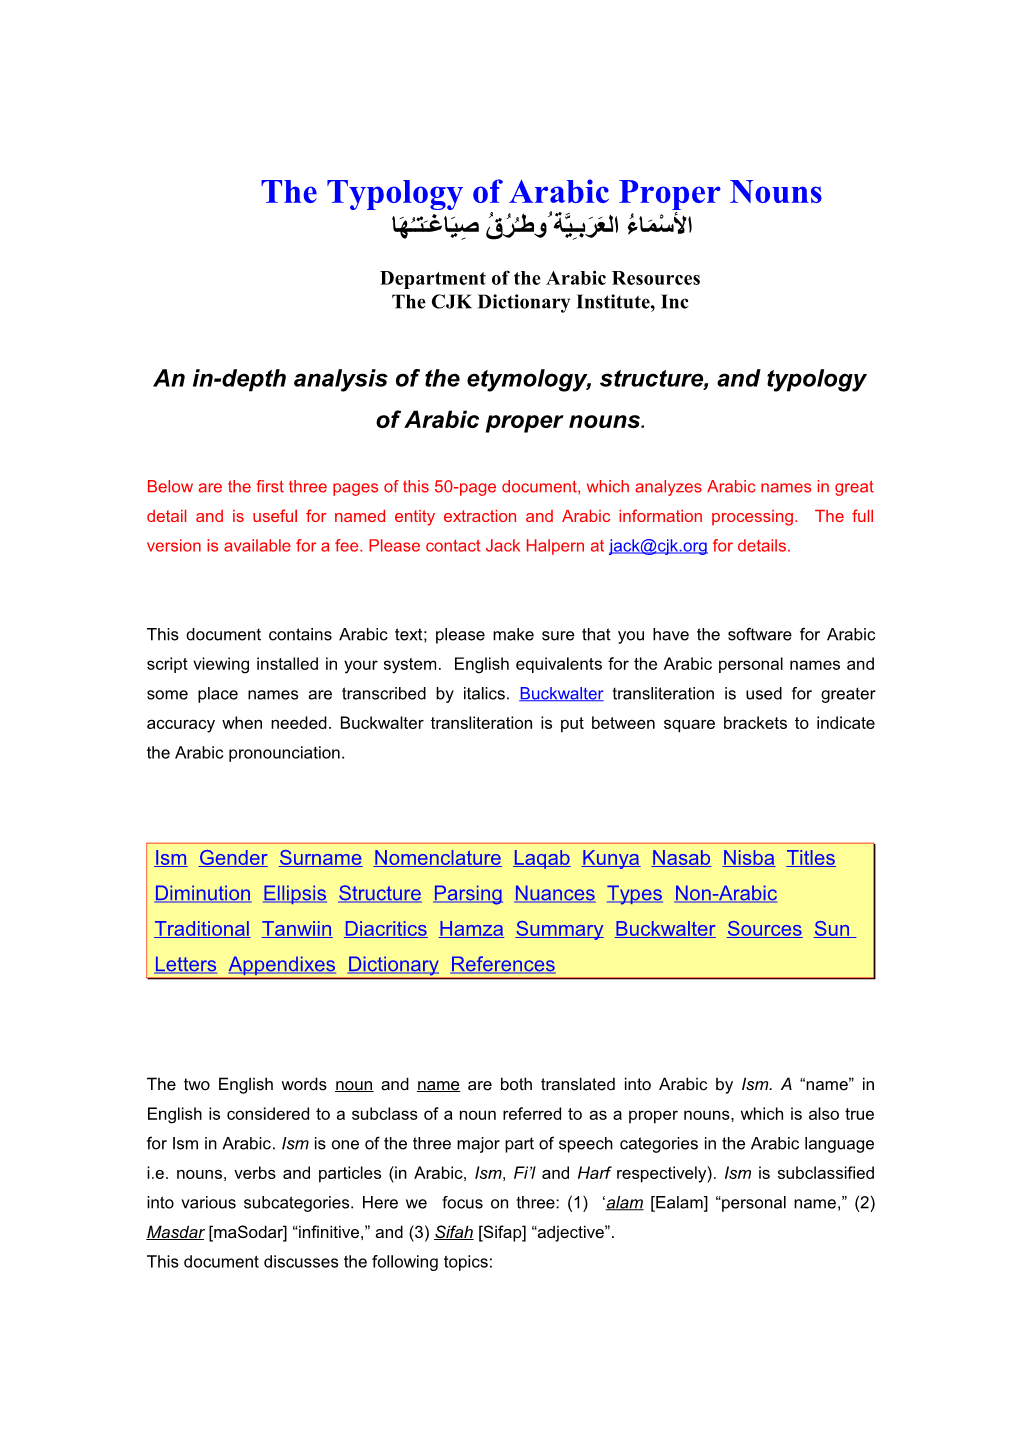 The Typology of Arabic Proper Nouns